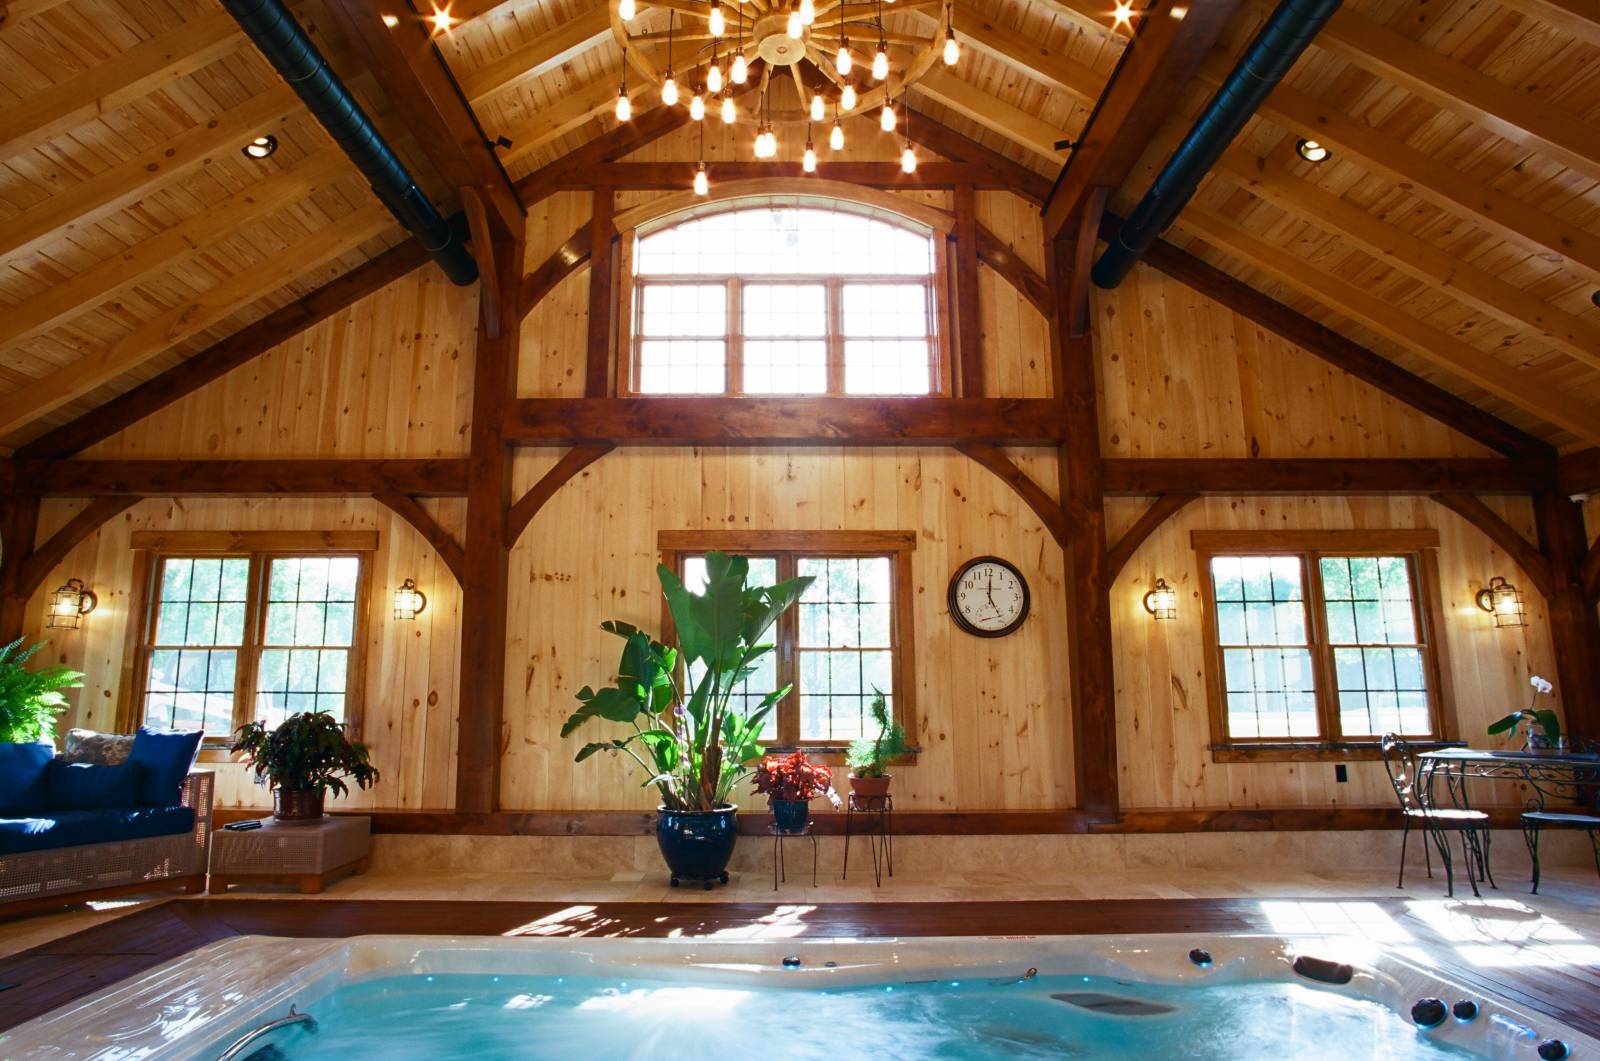 Classic Timber Frame Structure • Many Windows for Lots of Light • Timber Frame Indoor Pool with Exposed Beams